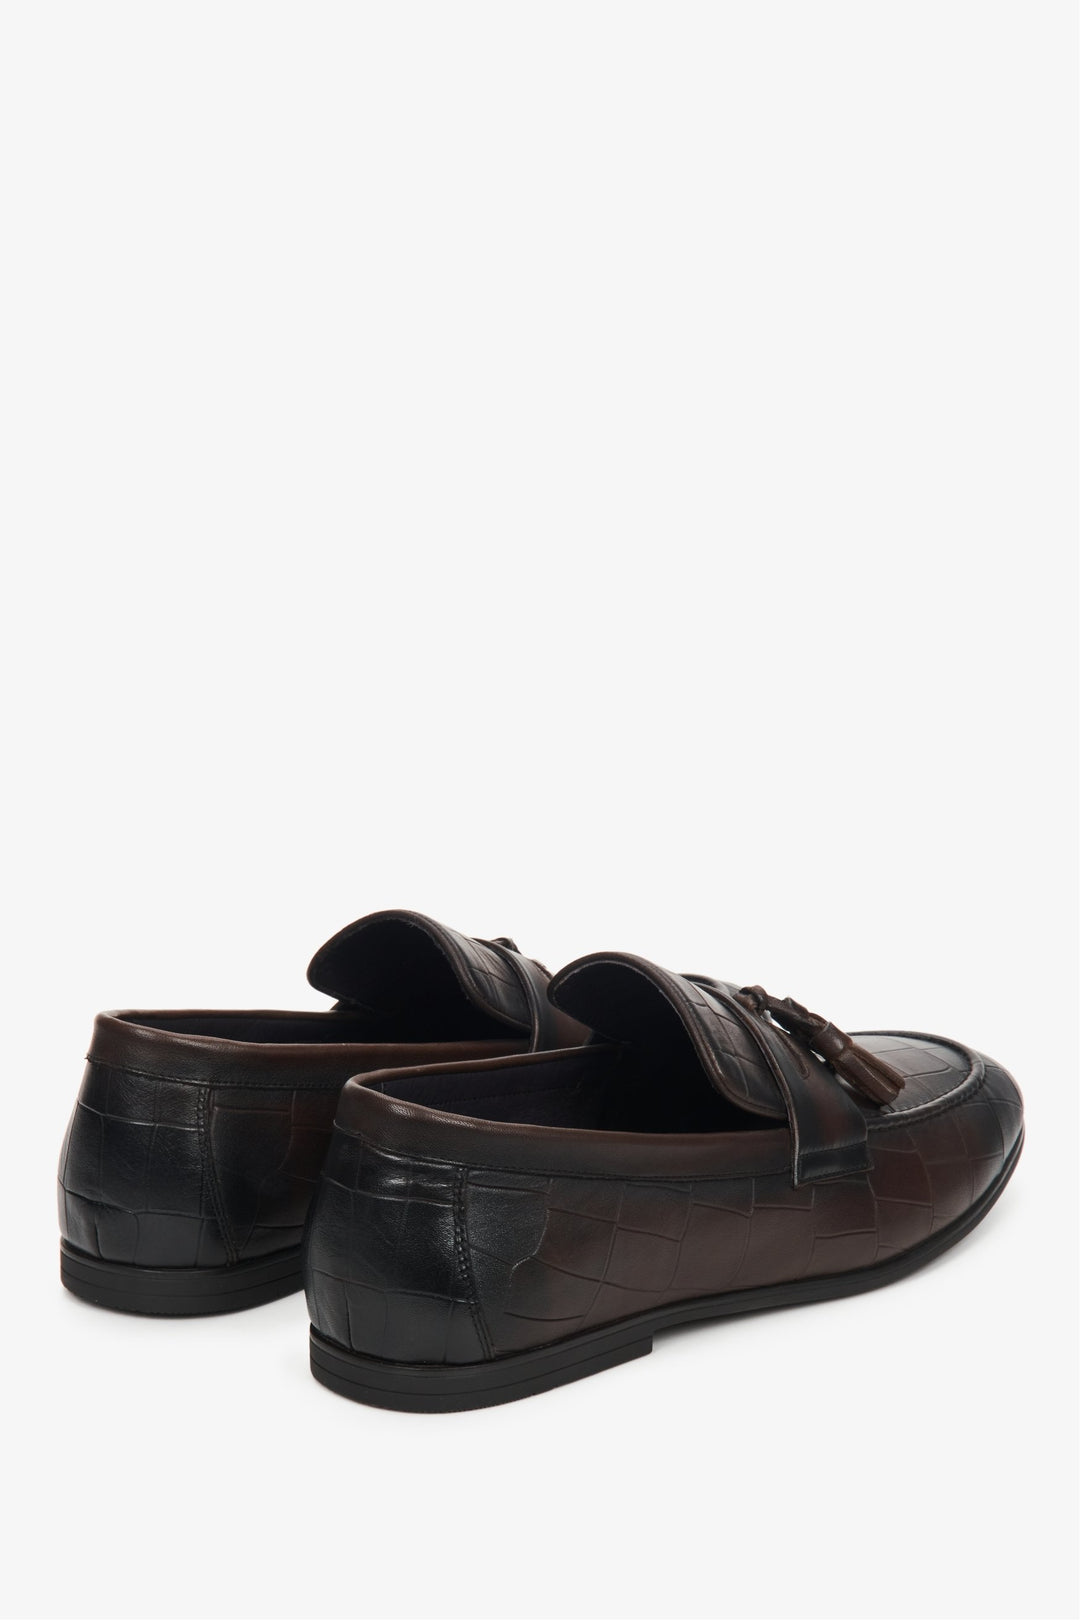 Men's dark brown loafers by Estro - close-up of the heel and the side of the shoe.